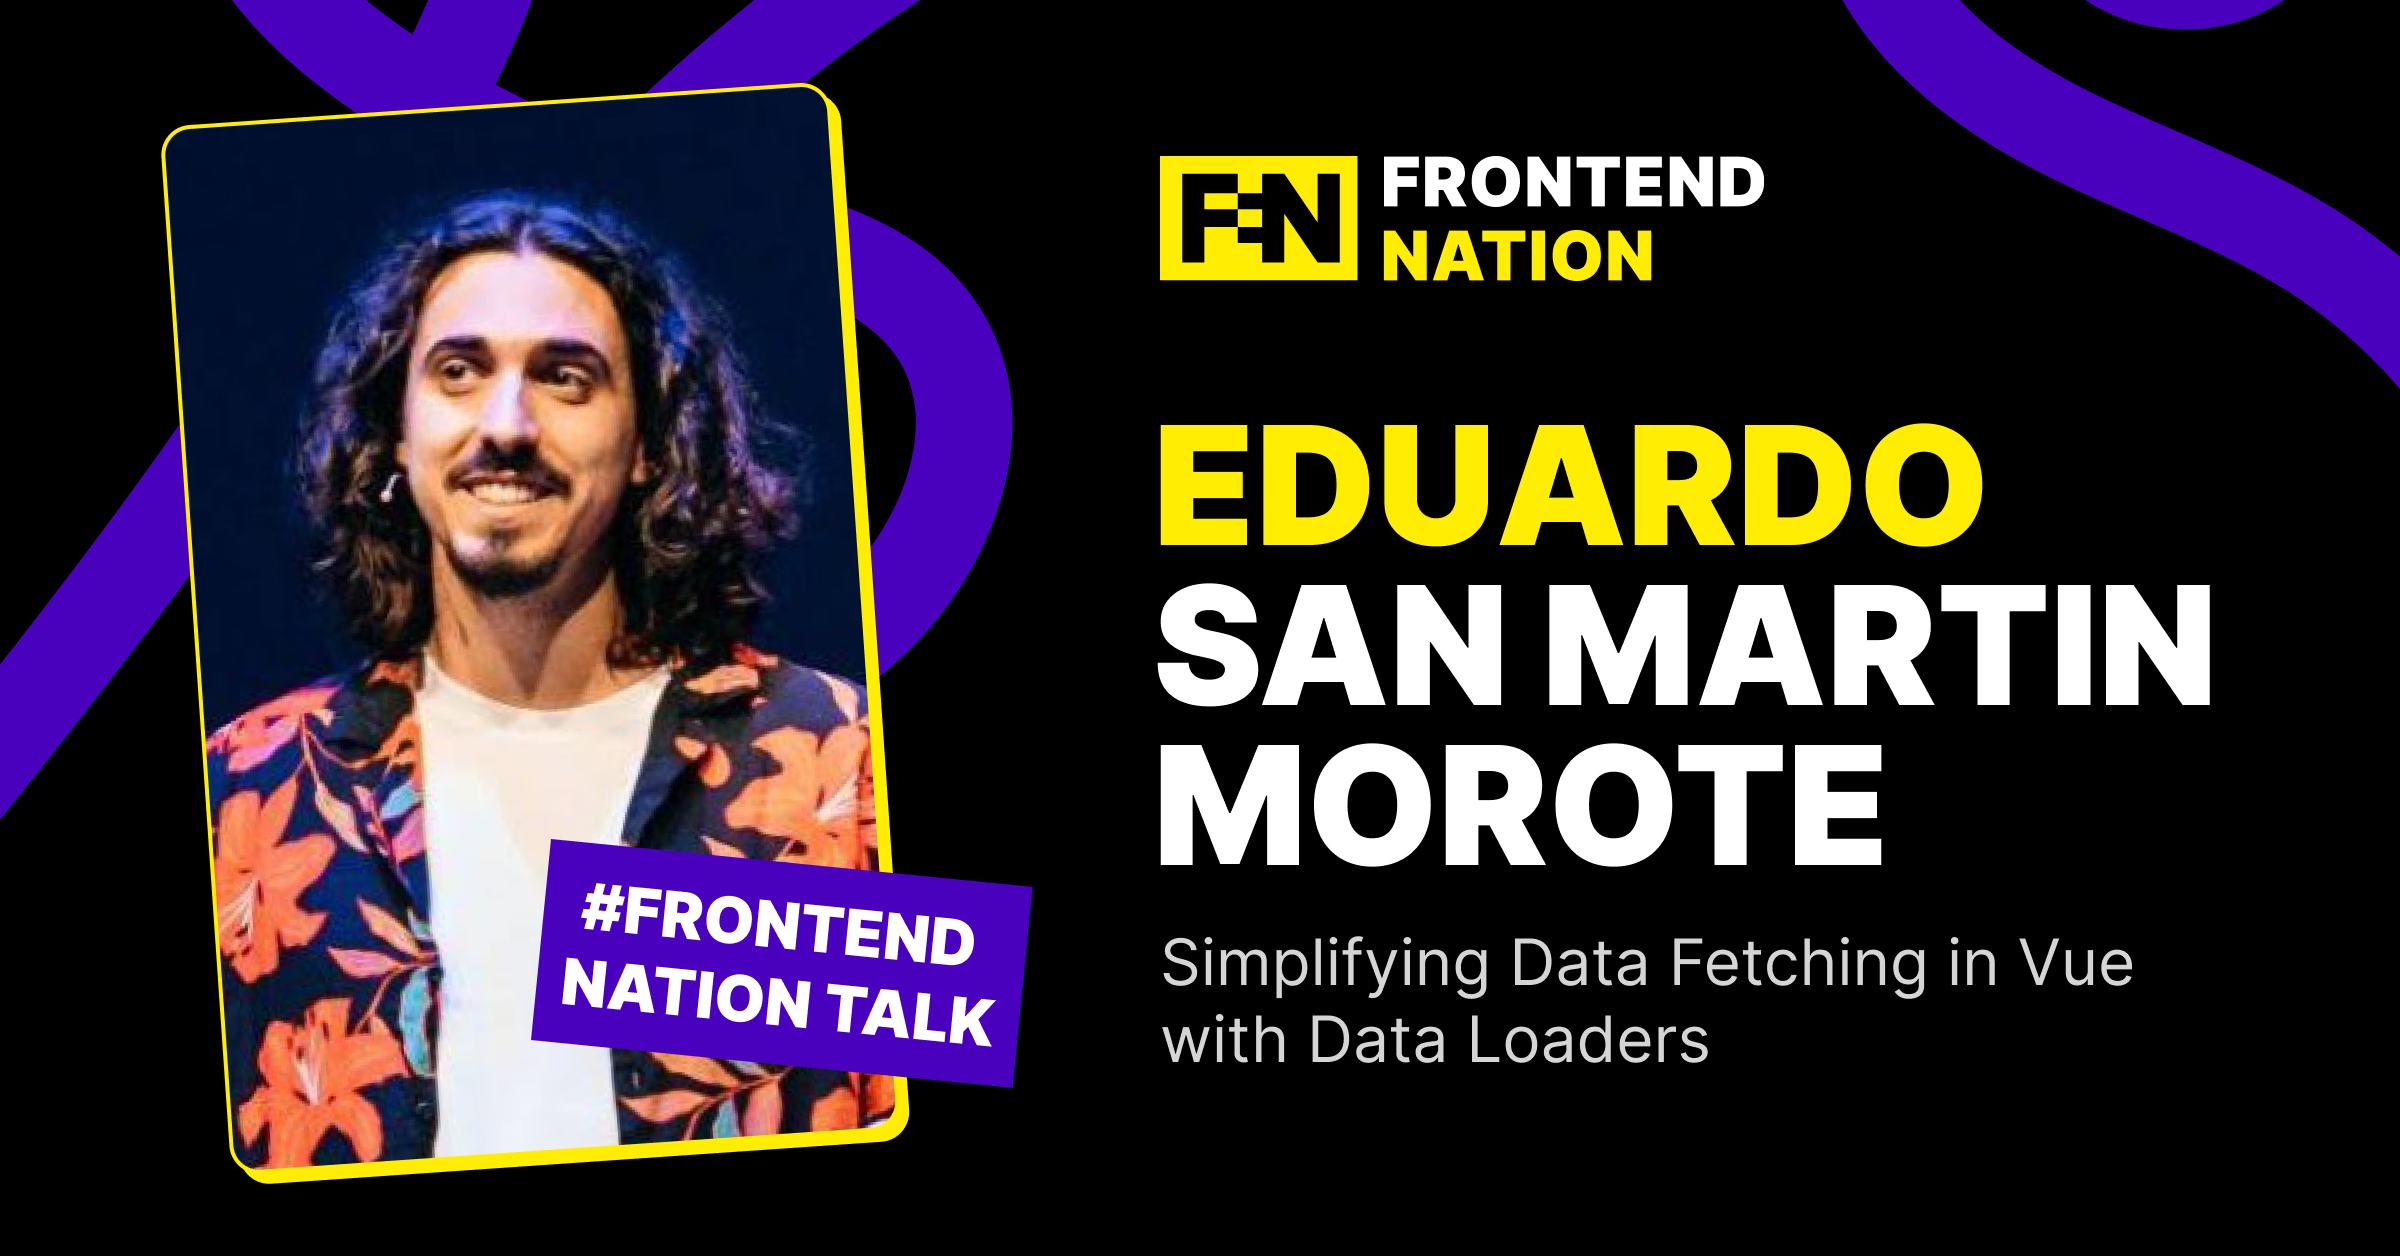 Simplifying Data Fetching in Vue with Data Loaders (Eduardo San Martin Morote at Frontend Nation)